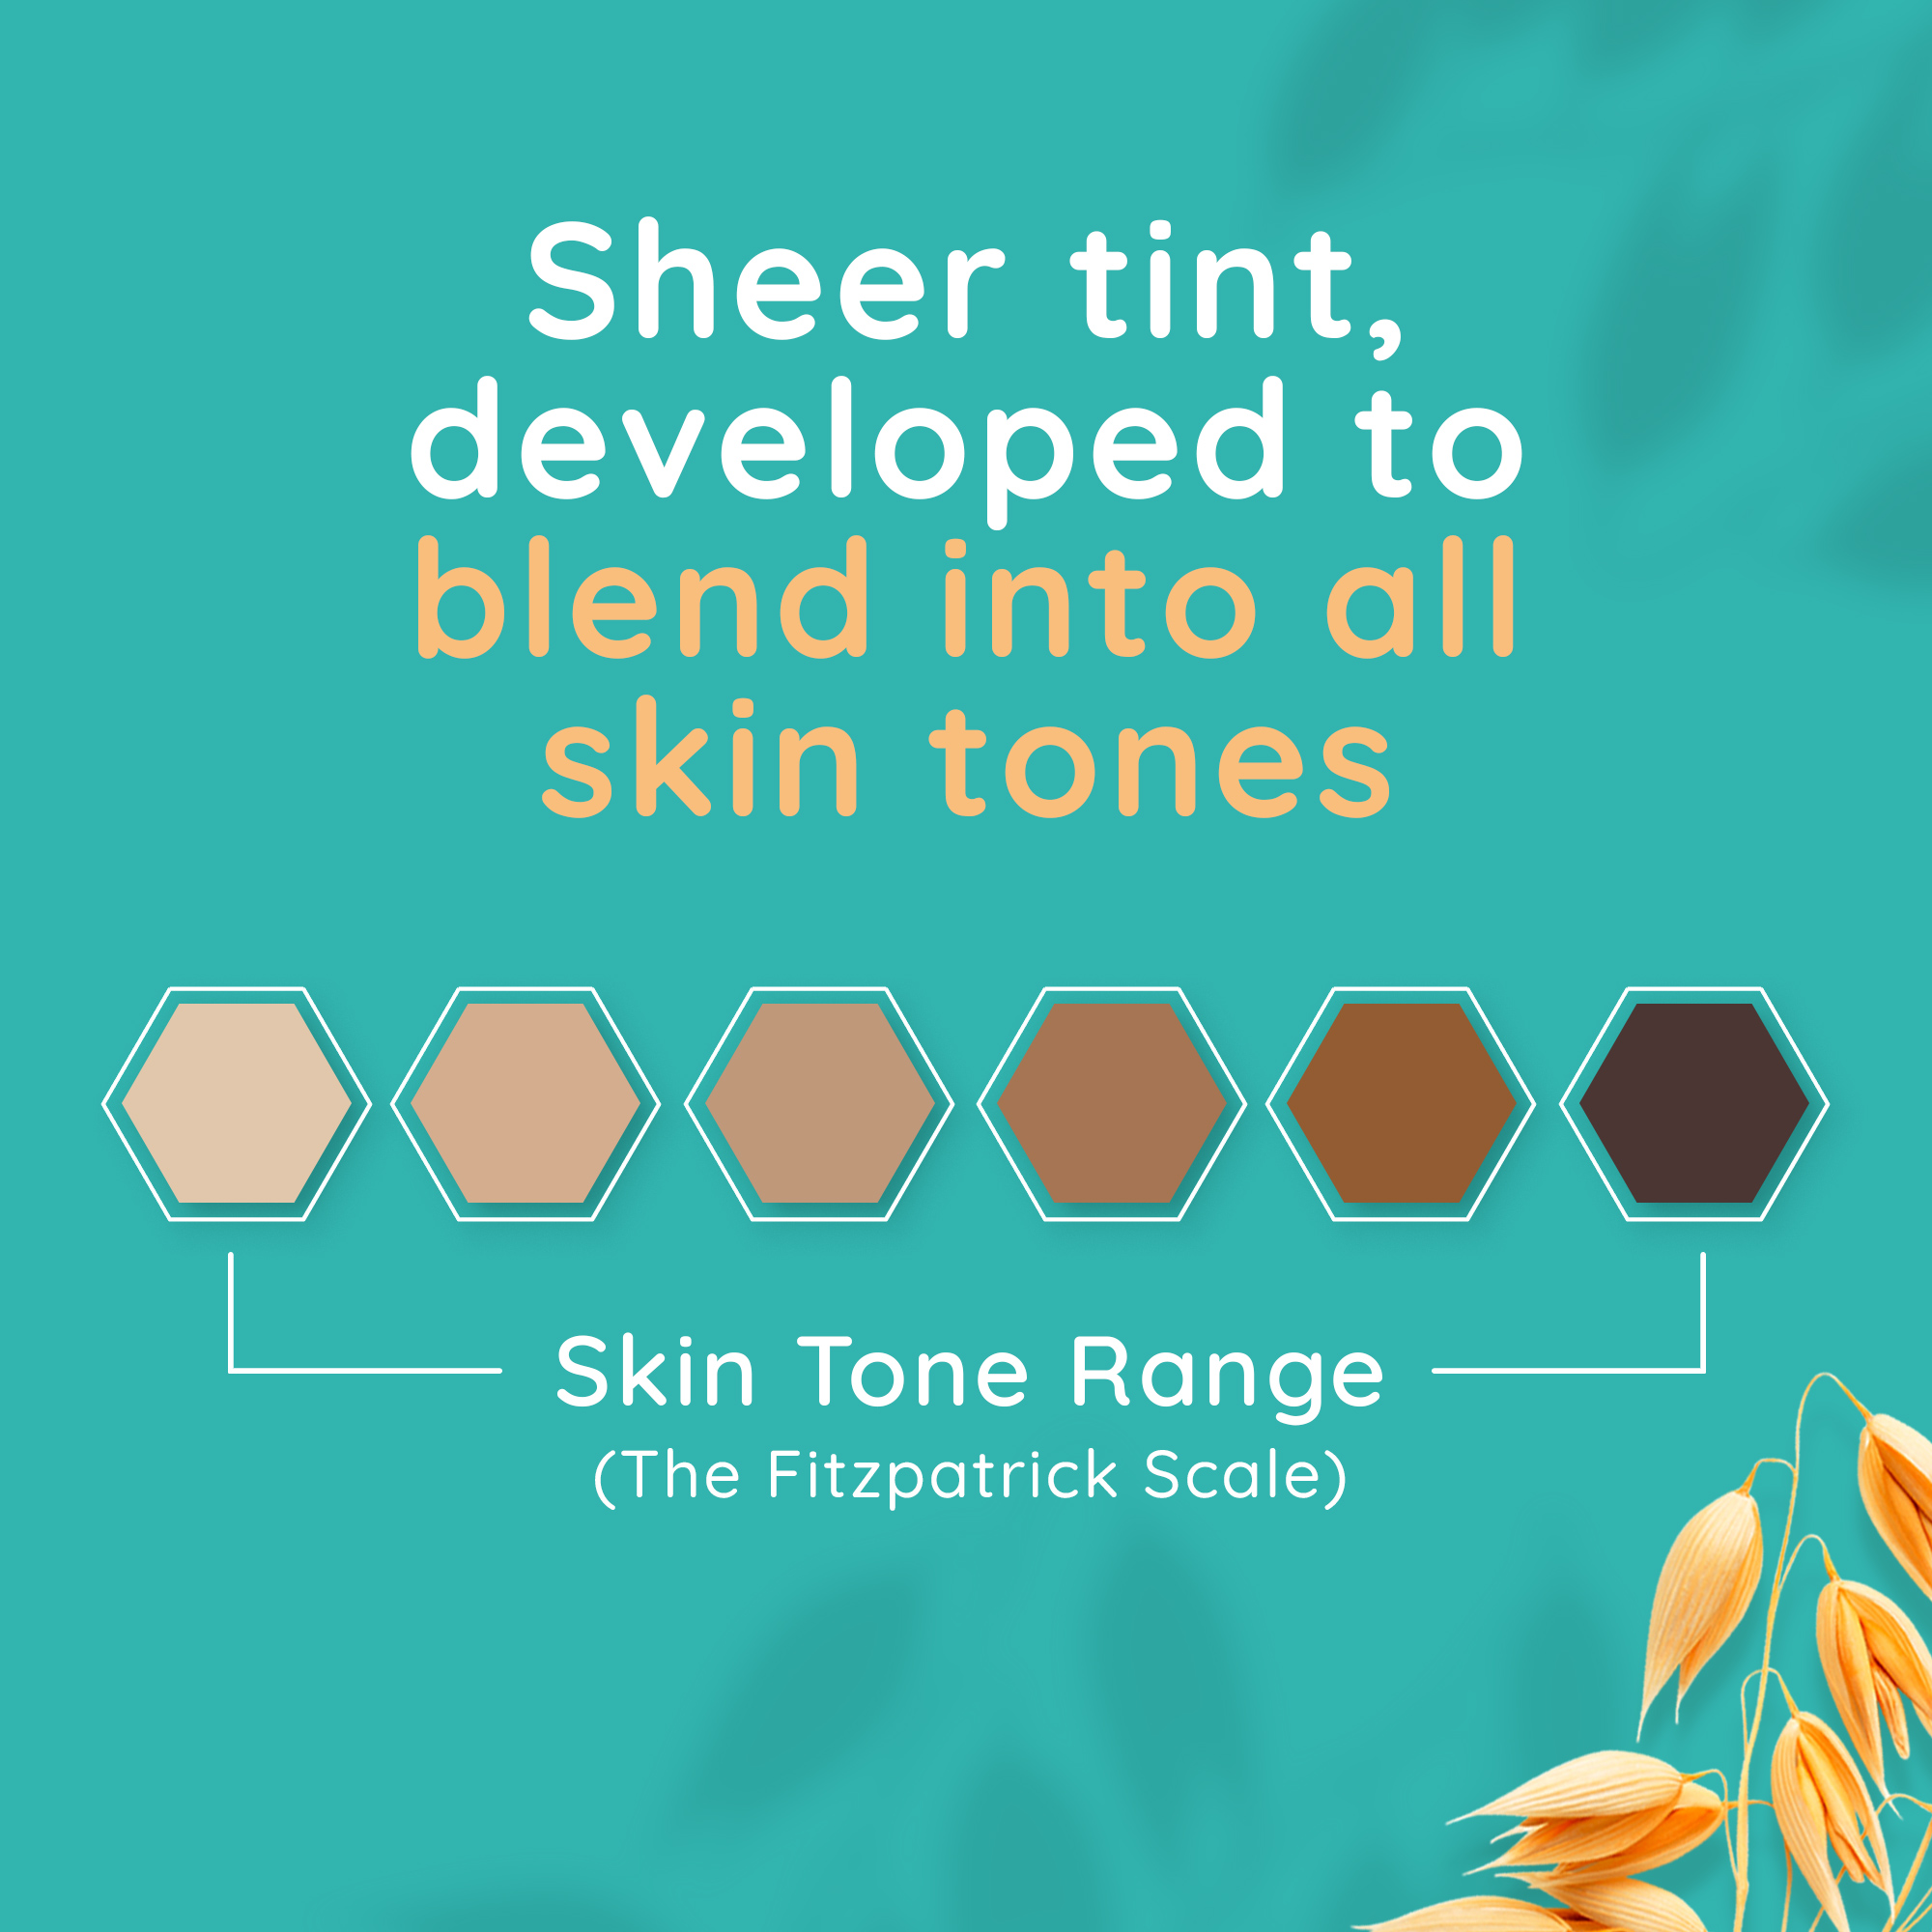 sheer tint developed to blend into all skin tones